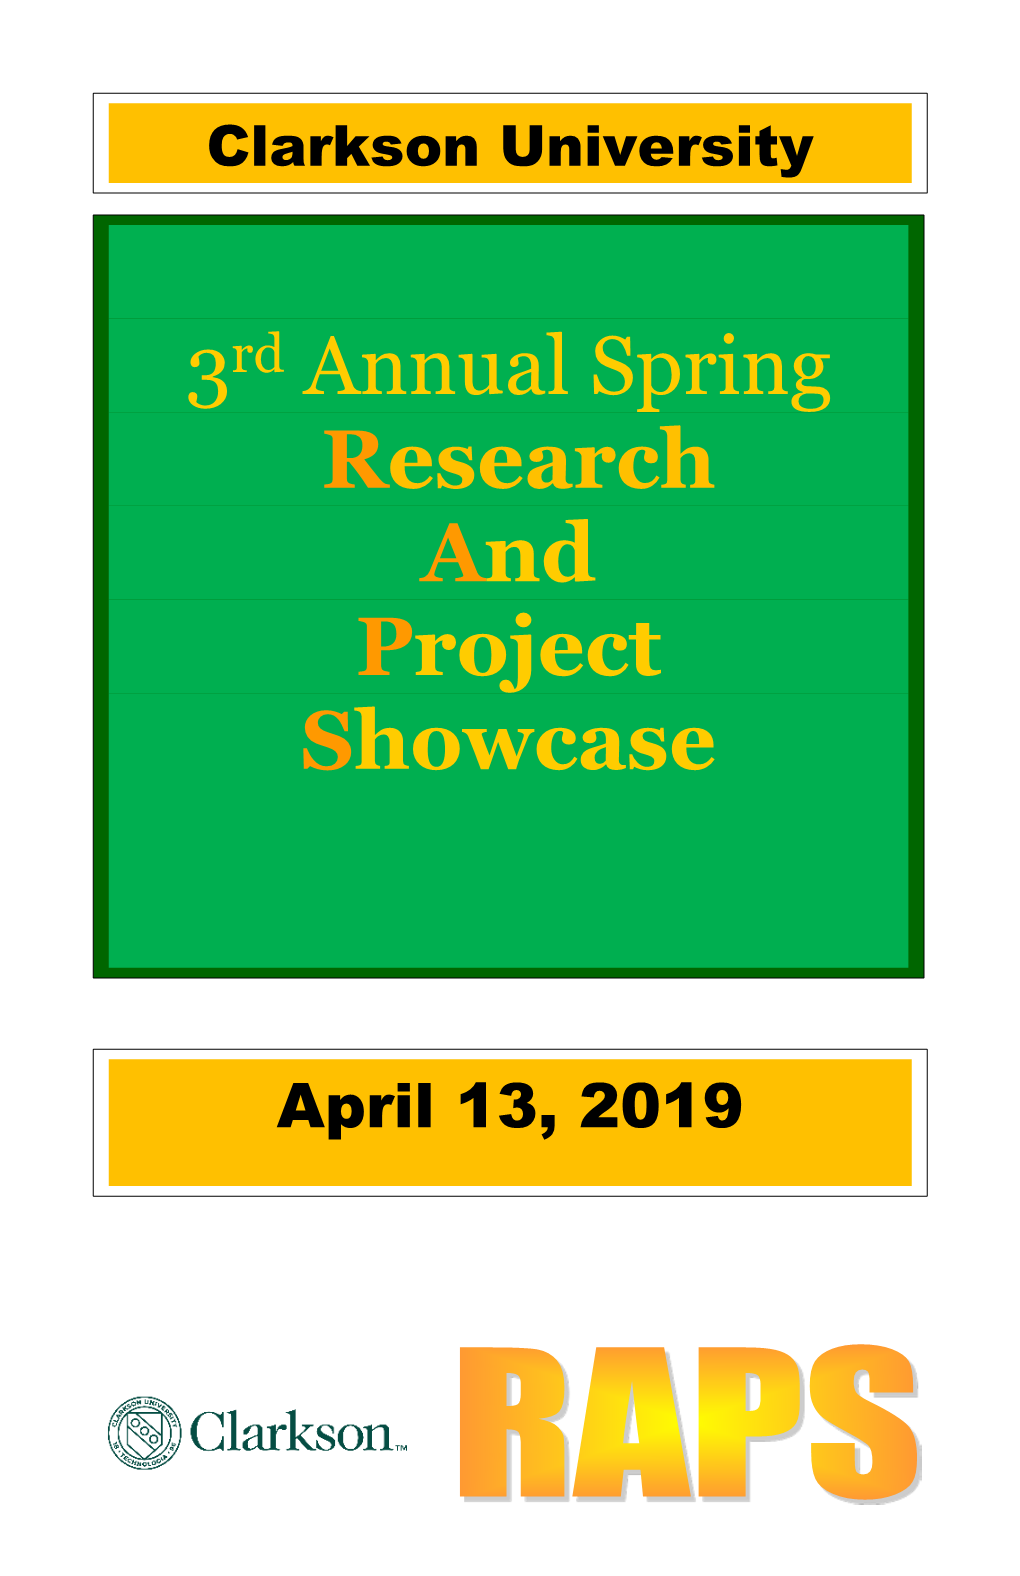 3Rd Annual Spring Research and Project Showcase